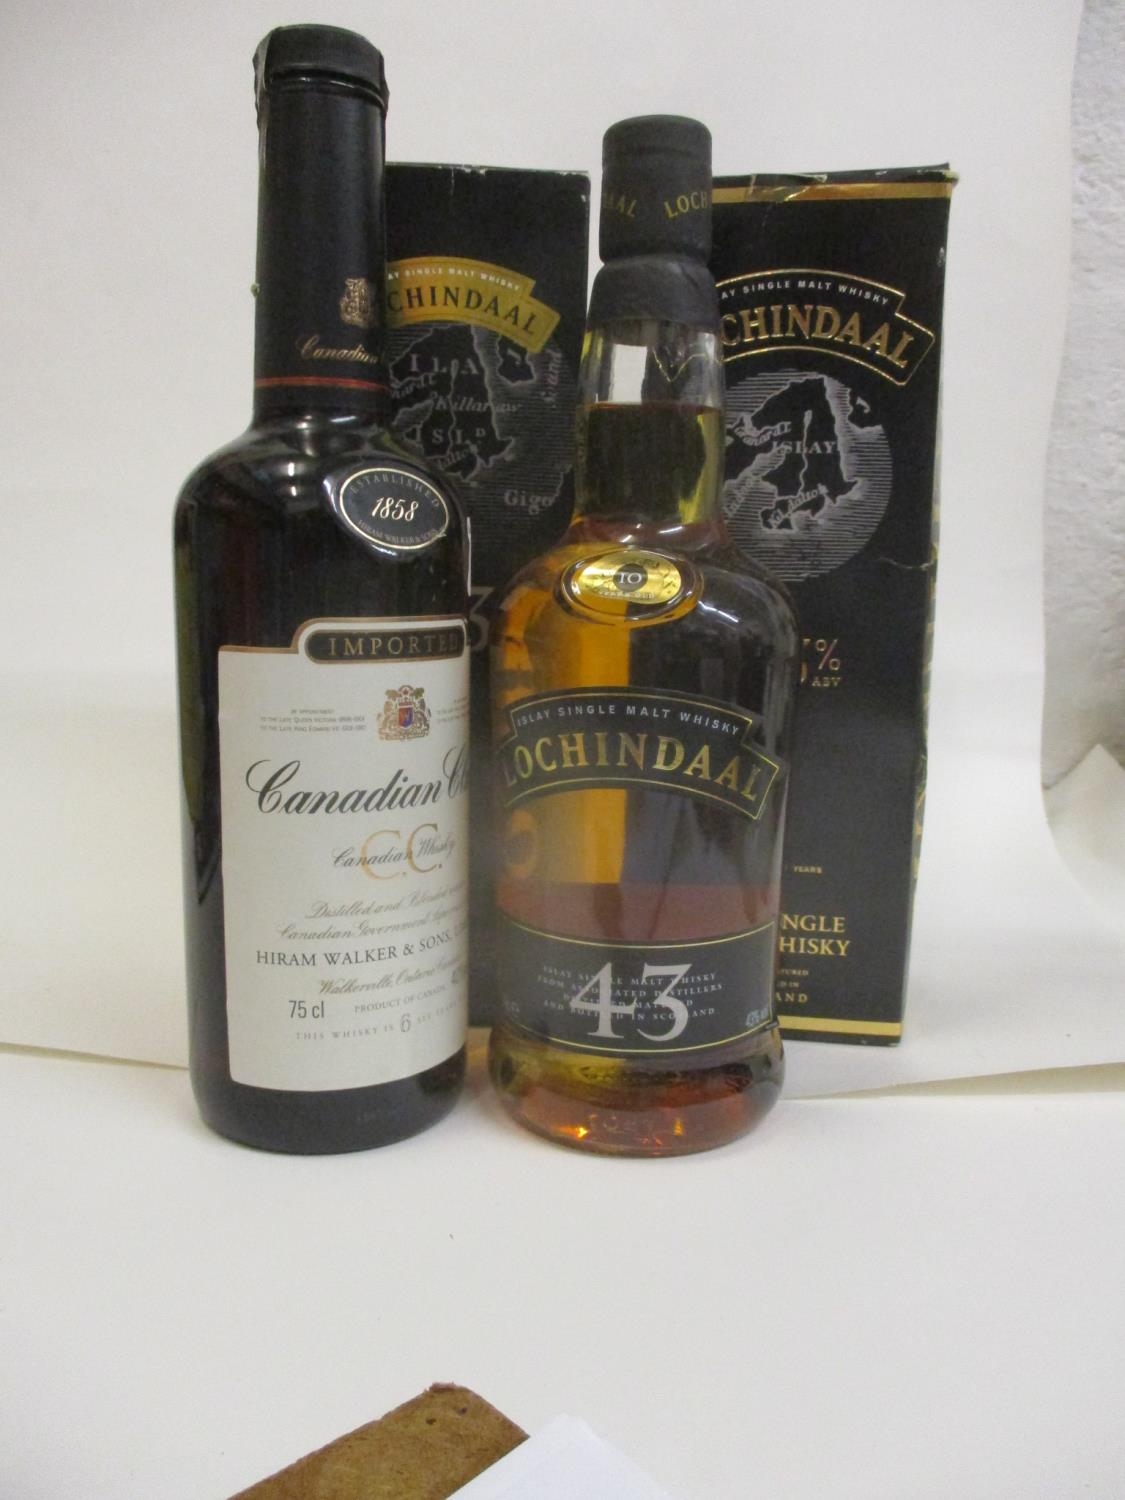 One bottle of Canadian Club whisky, 75cl, two bottles of Lochindaal